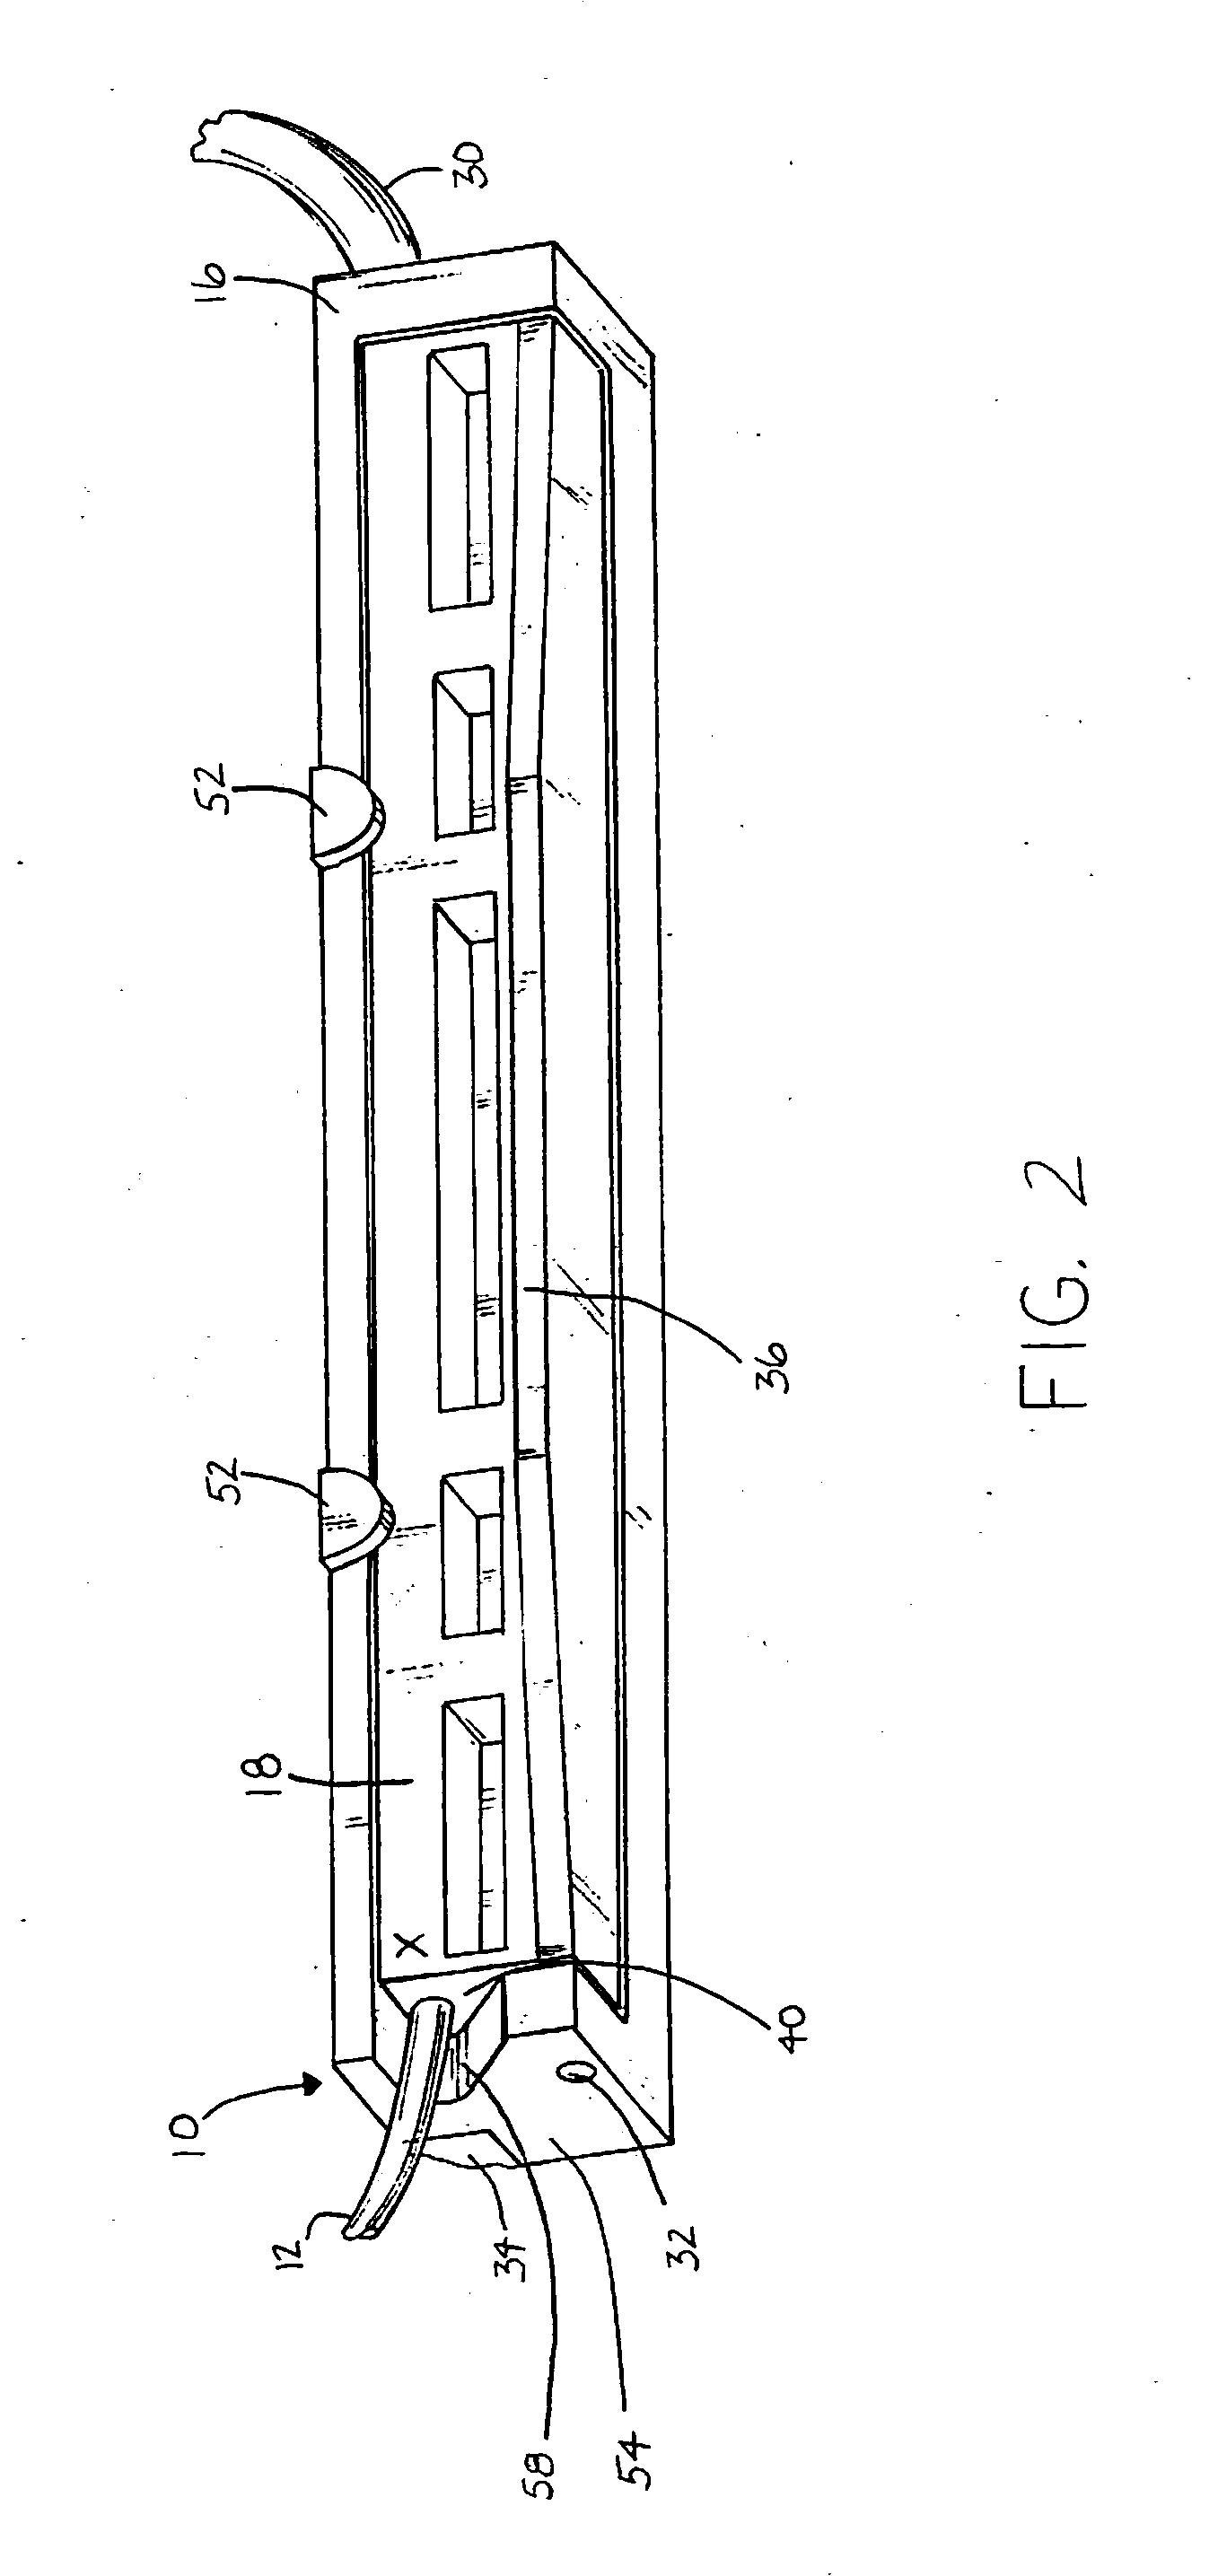 Electrical connector for an in-body multi-contact medical electrode device